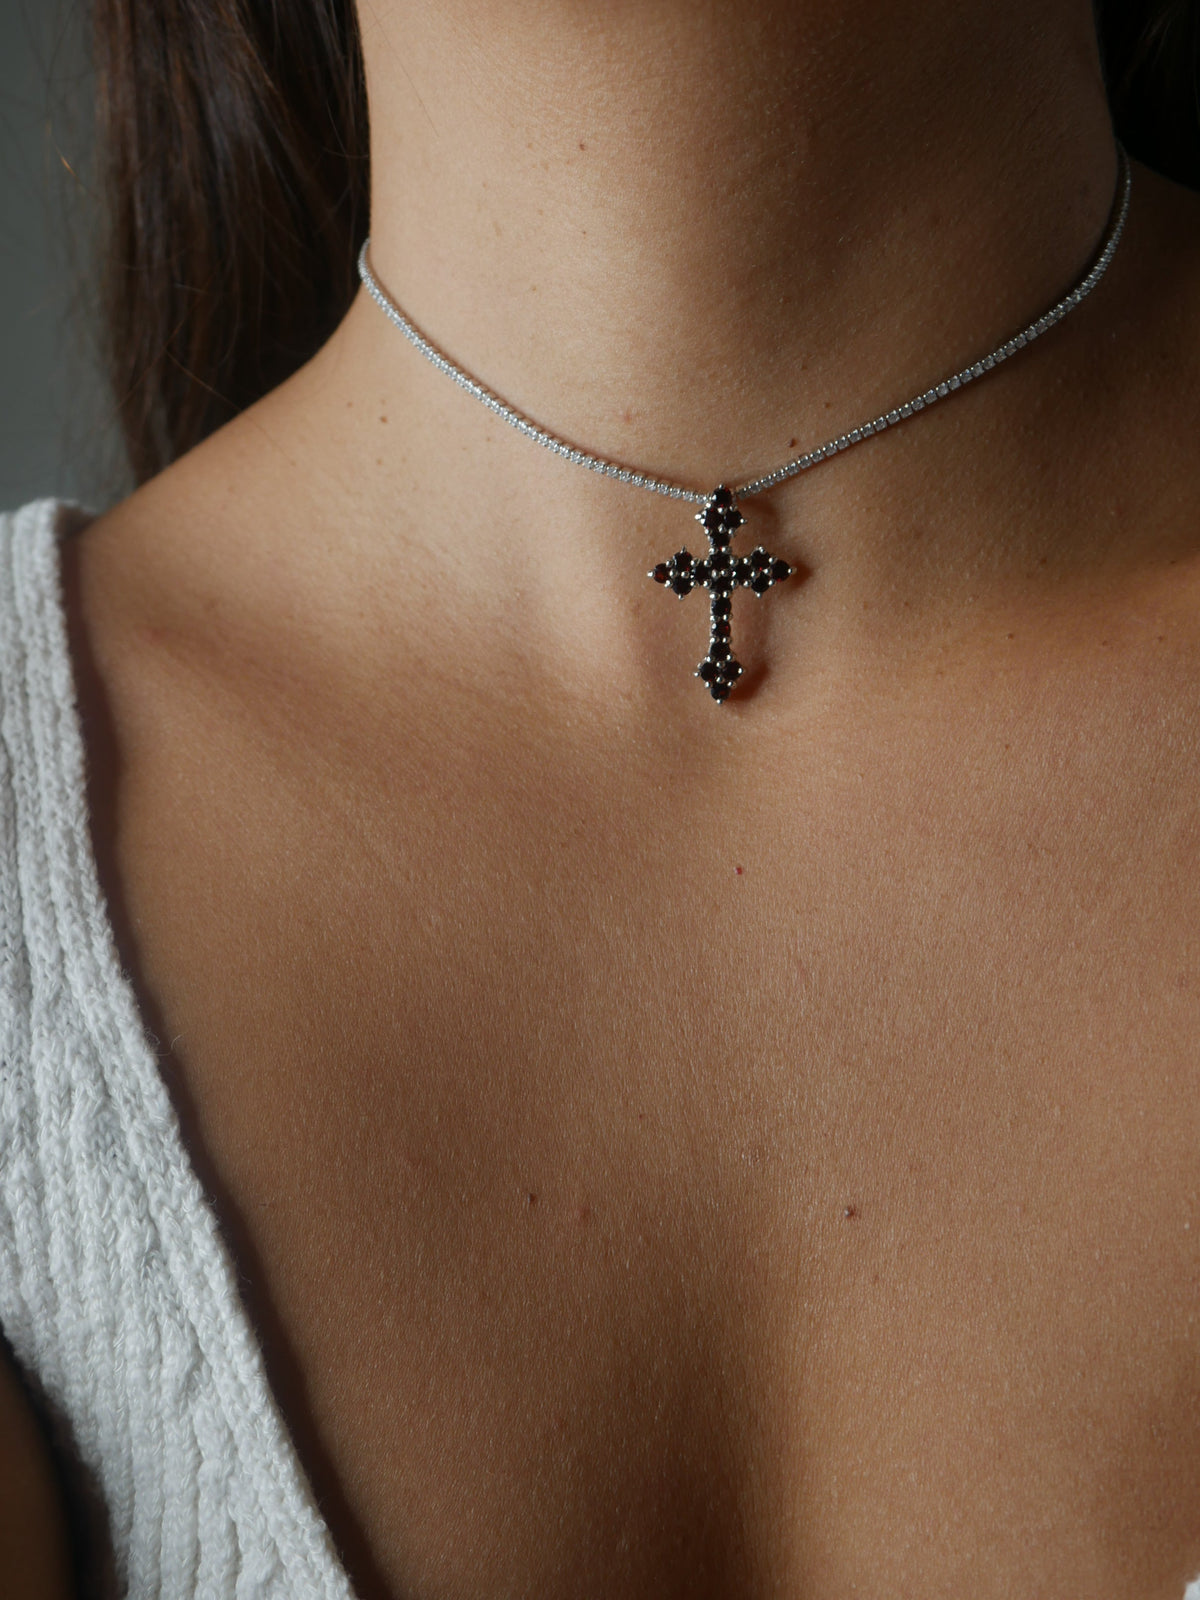 necklaces, silver necklace, Cross Necklace, Garnet Gemstone Cross Pendant. January Birthstone Cross Necklace. Tennis chokers diamond cz rhinestone cubic zirconia choker. Chokers with red cross. Gothic cross necklace. Unique cross necklaces sterling silver, white gold. Religious necklace. Unique cross necklaces. Kesley Boutique , christmas gifts, trending on tiktok, fashion jewelry, statement jewelry, statement necklaces, birthday gifts, anniversary gifts, fine jewelry